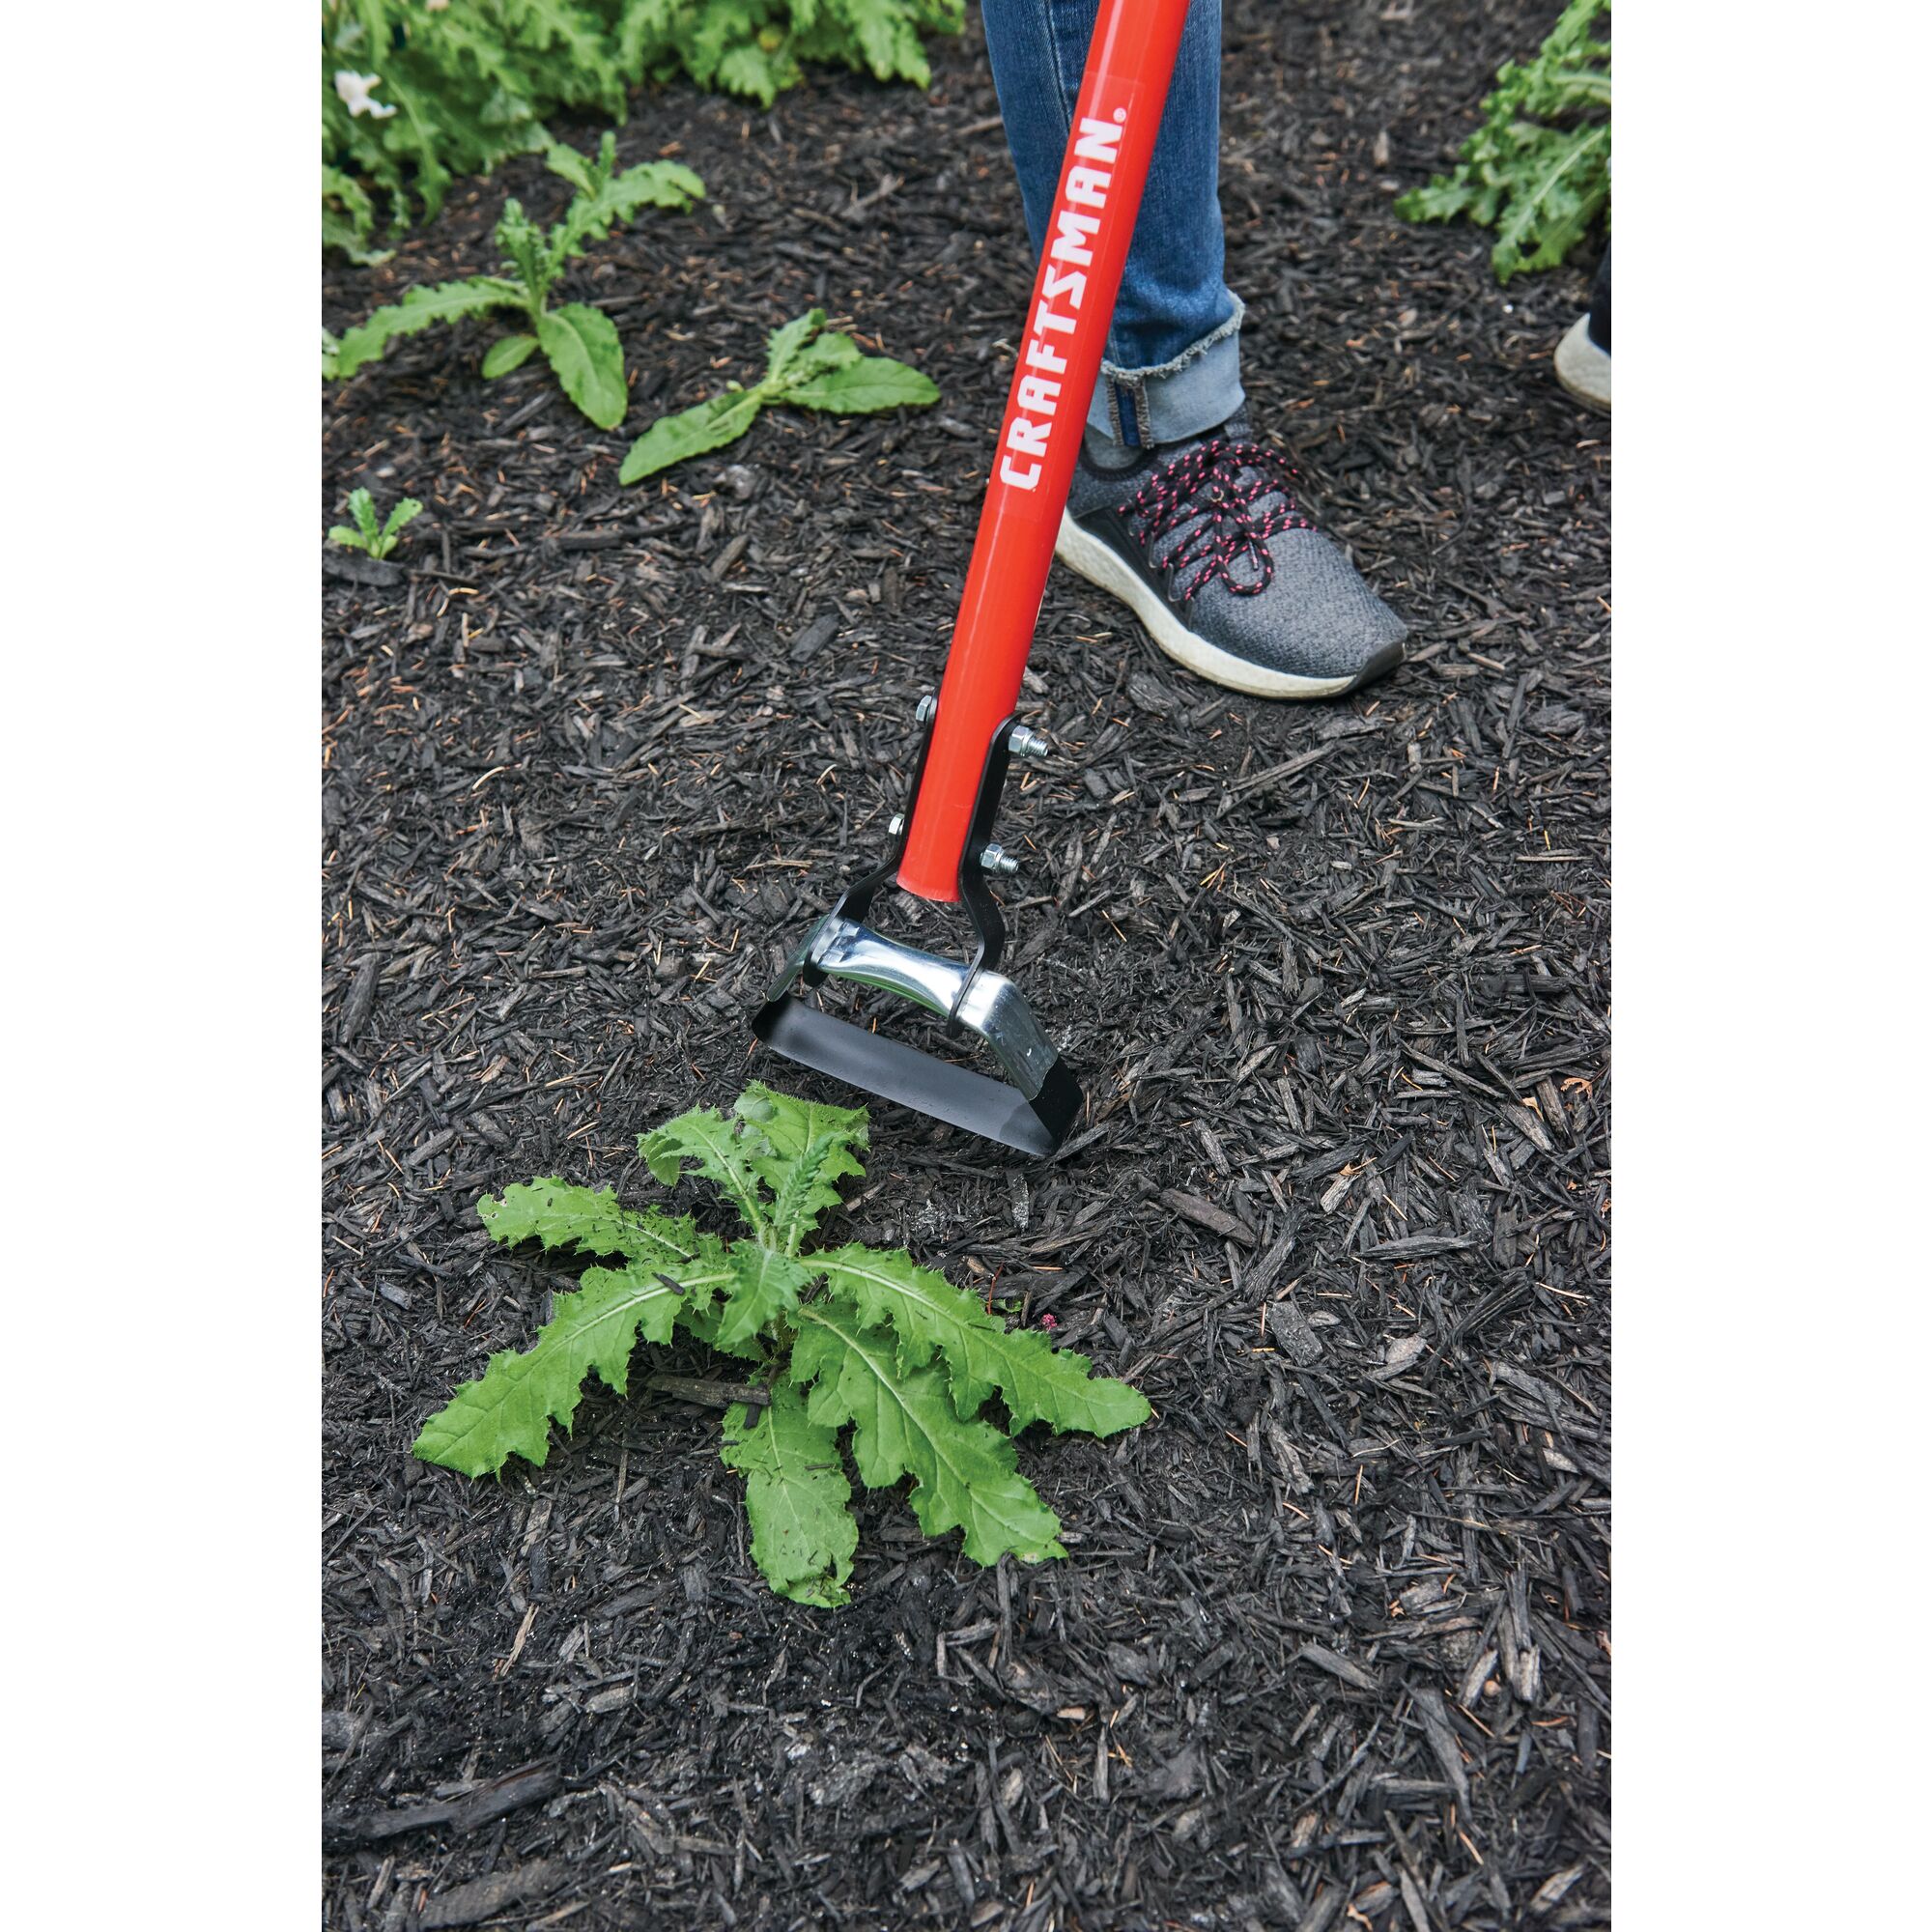 Fiberglass handle weeding hoe being used to remove a weed.